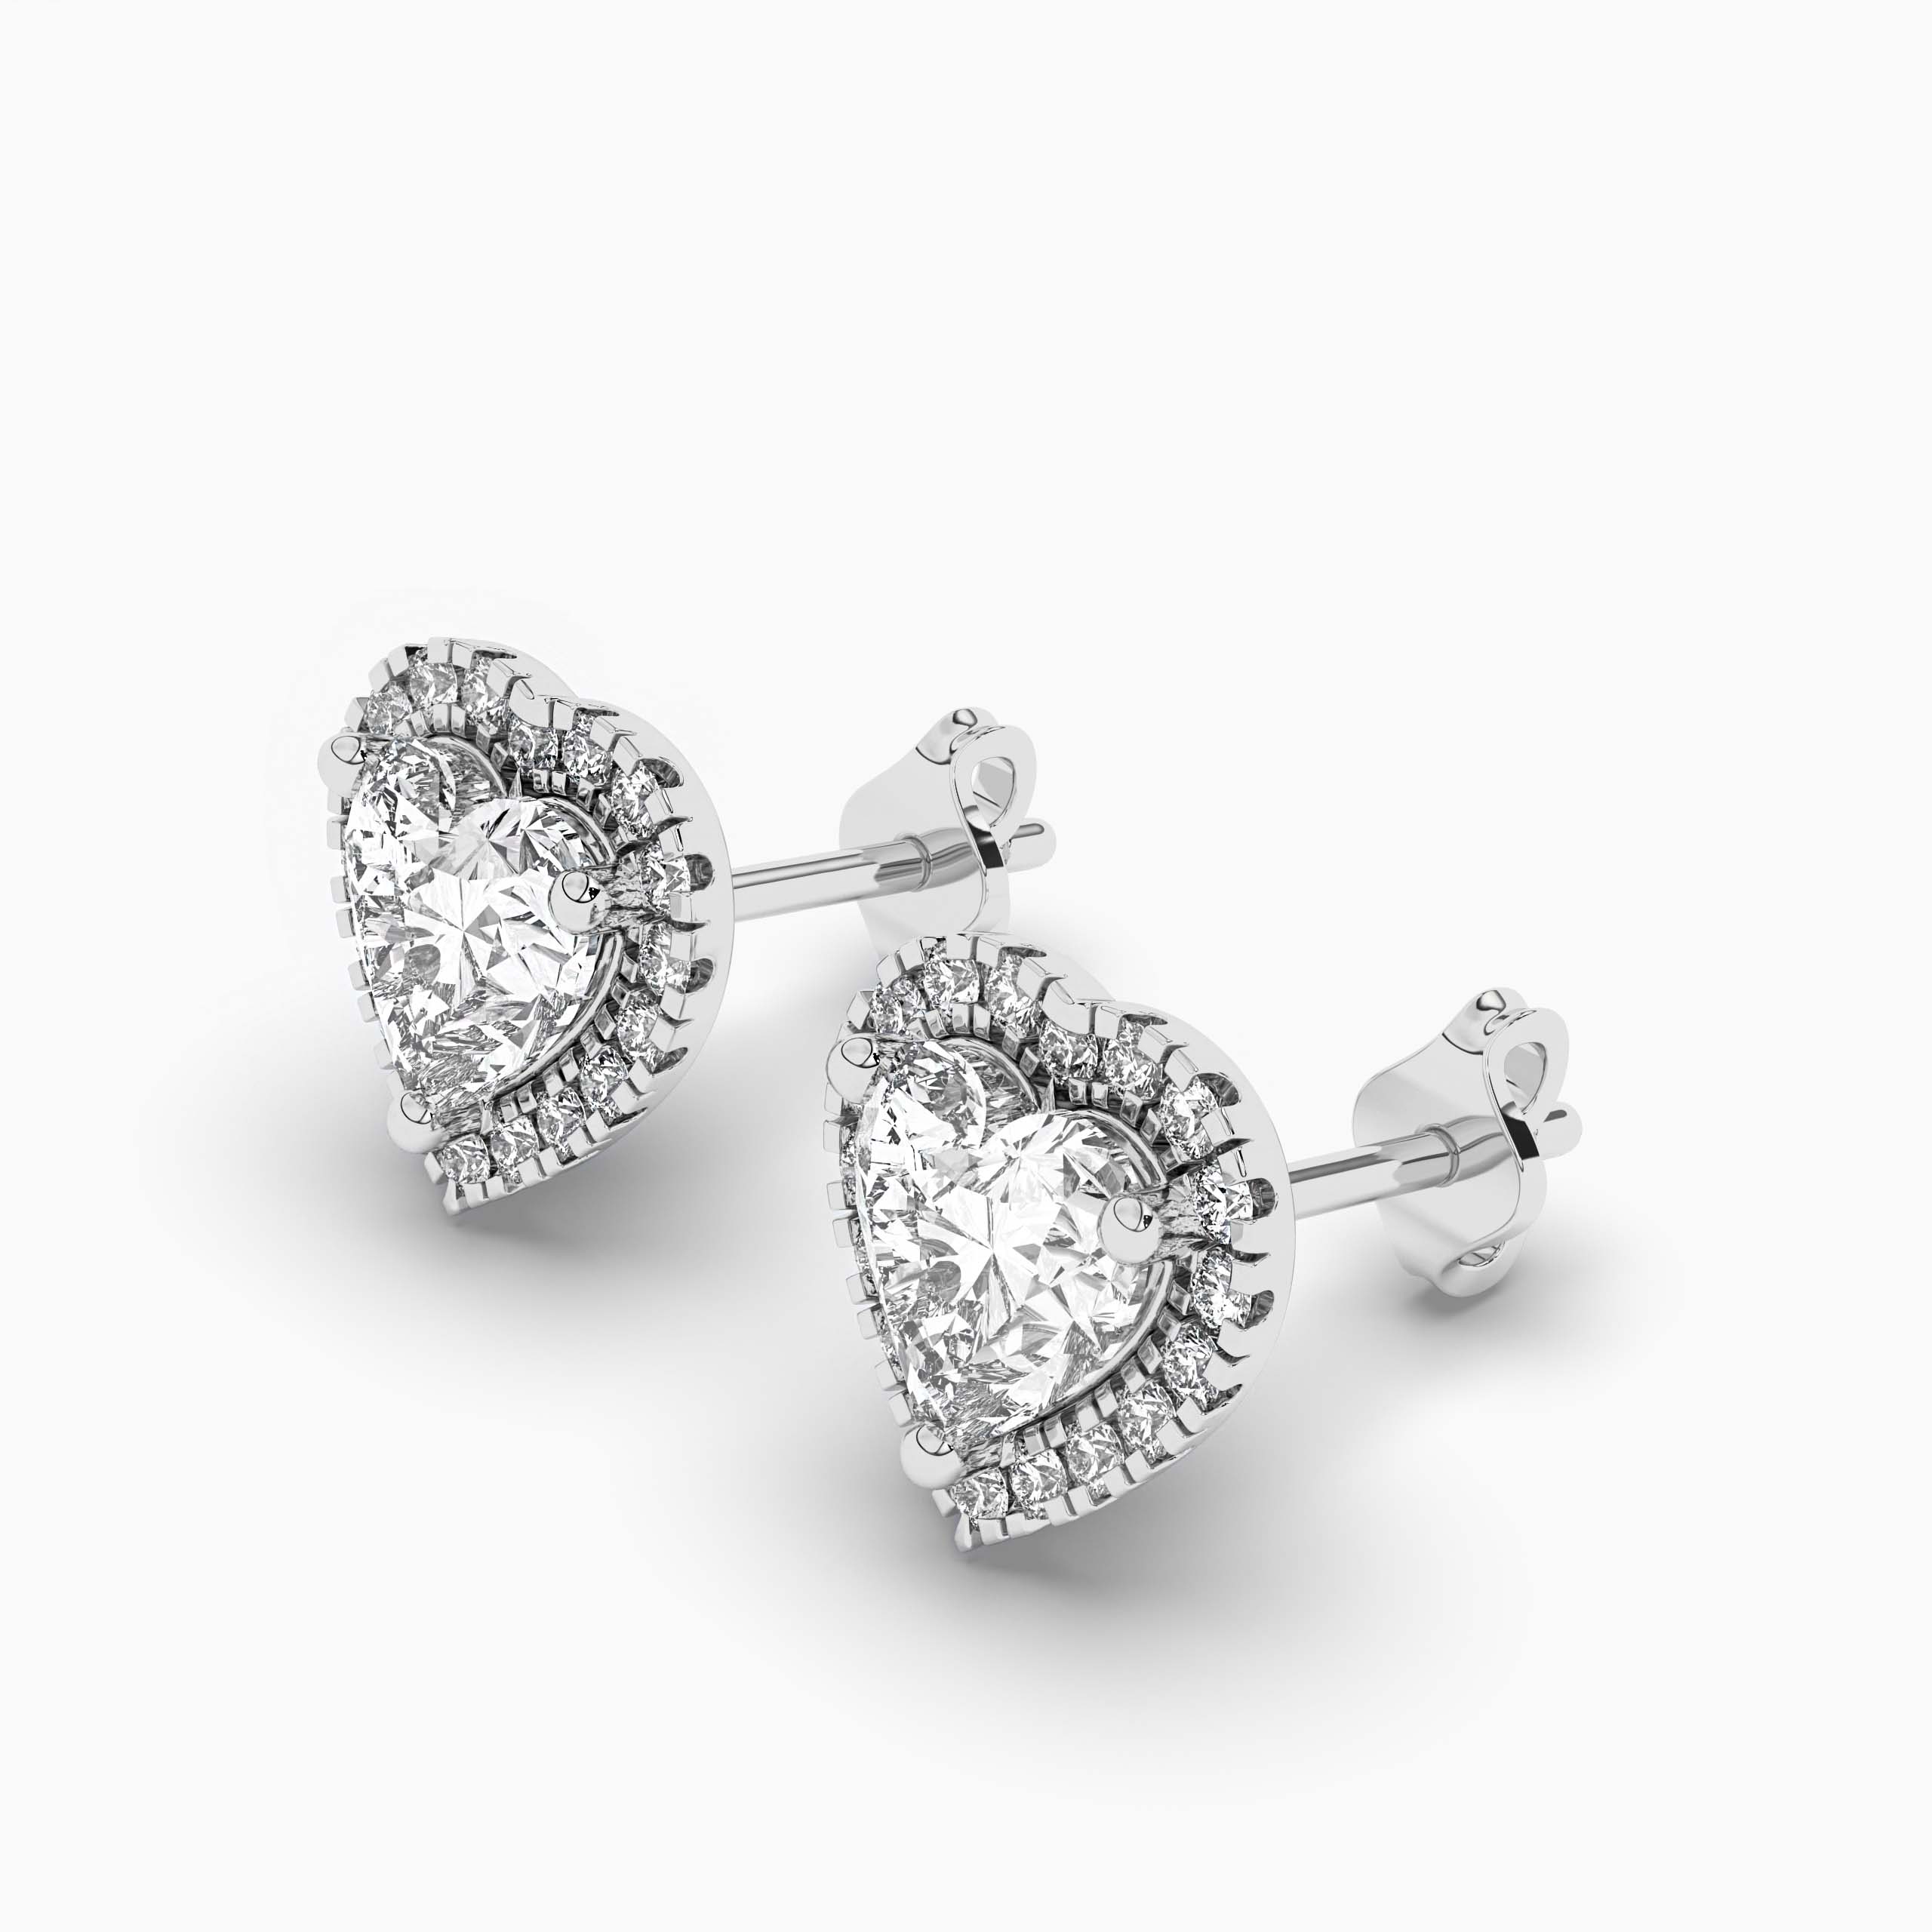 HEART AND DIAMONDS HALO STUD EARRINGS IN WHITE GOLD